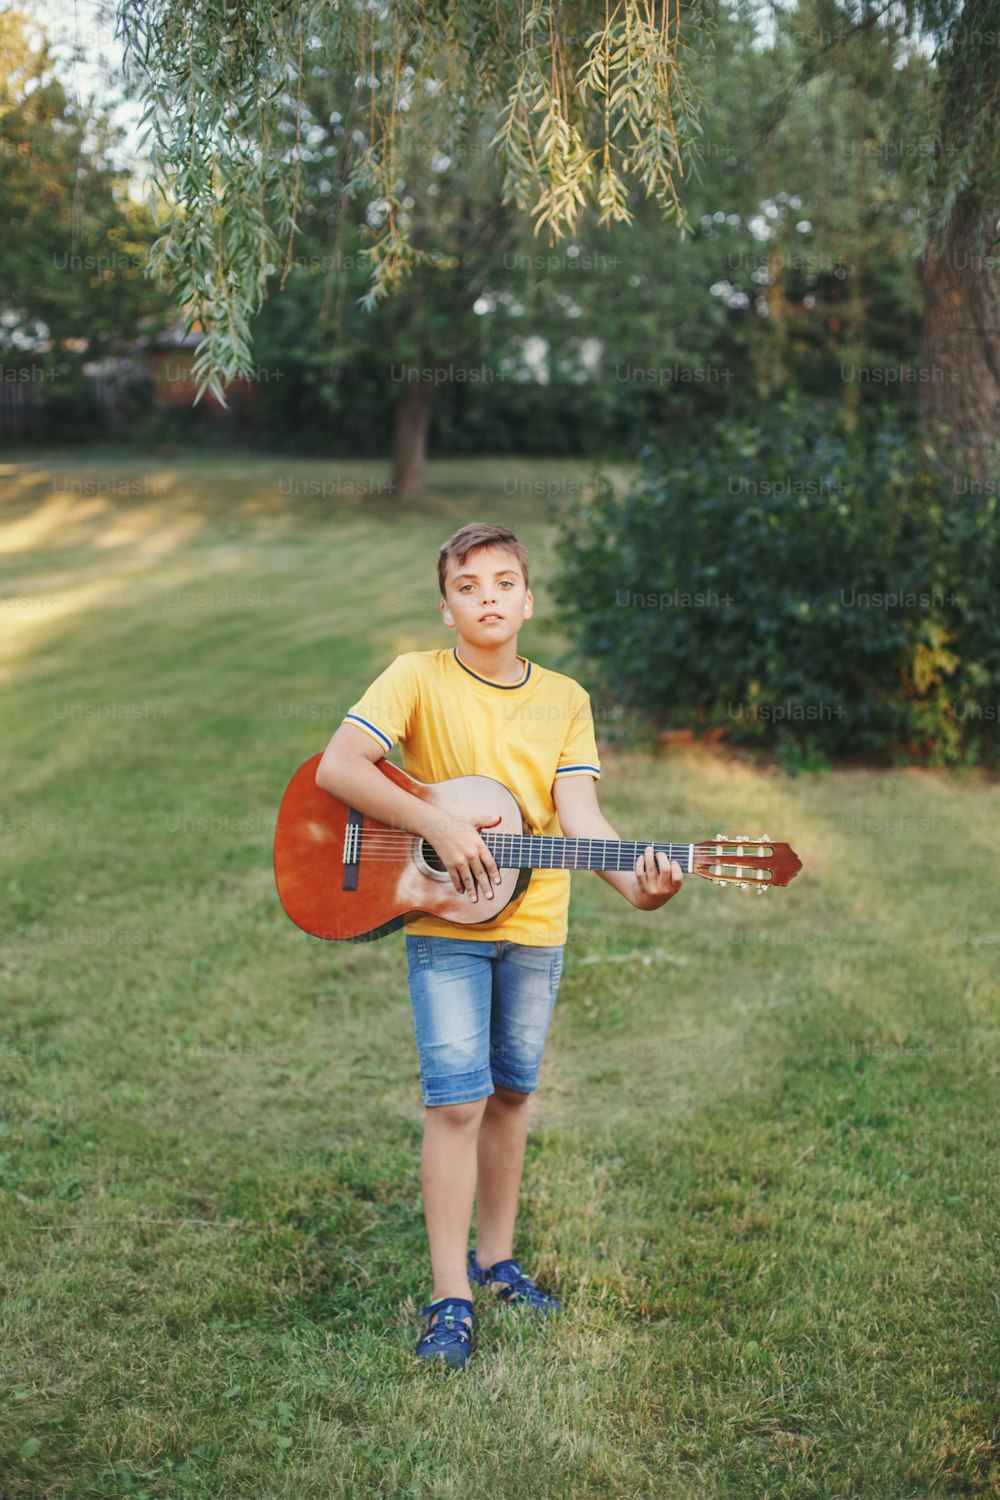 Hard of hearing preteen boy playing guitar outdoor. Child with hearing aids in ears playing music and singing song in park. Hobby art activity for children kids. Authentic childhood moment.